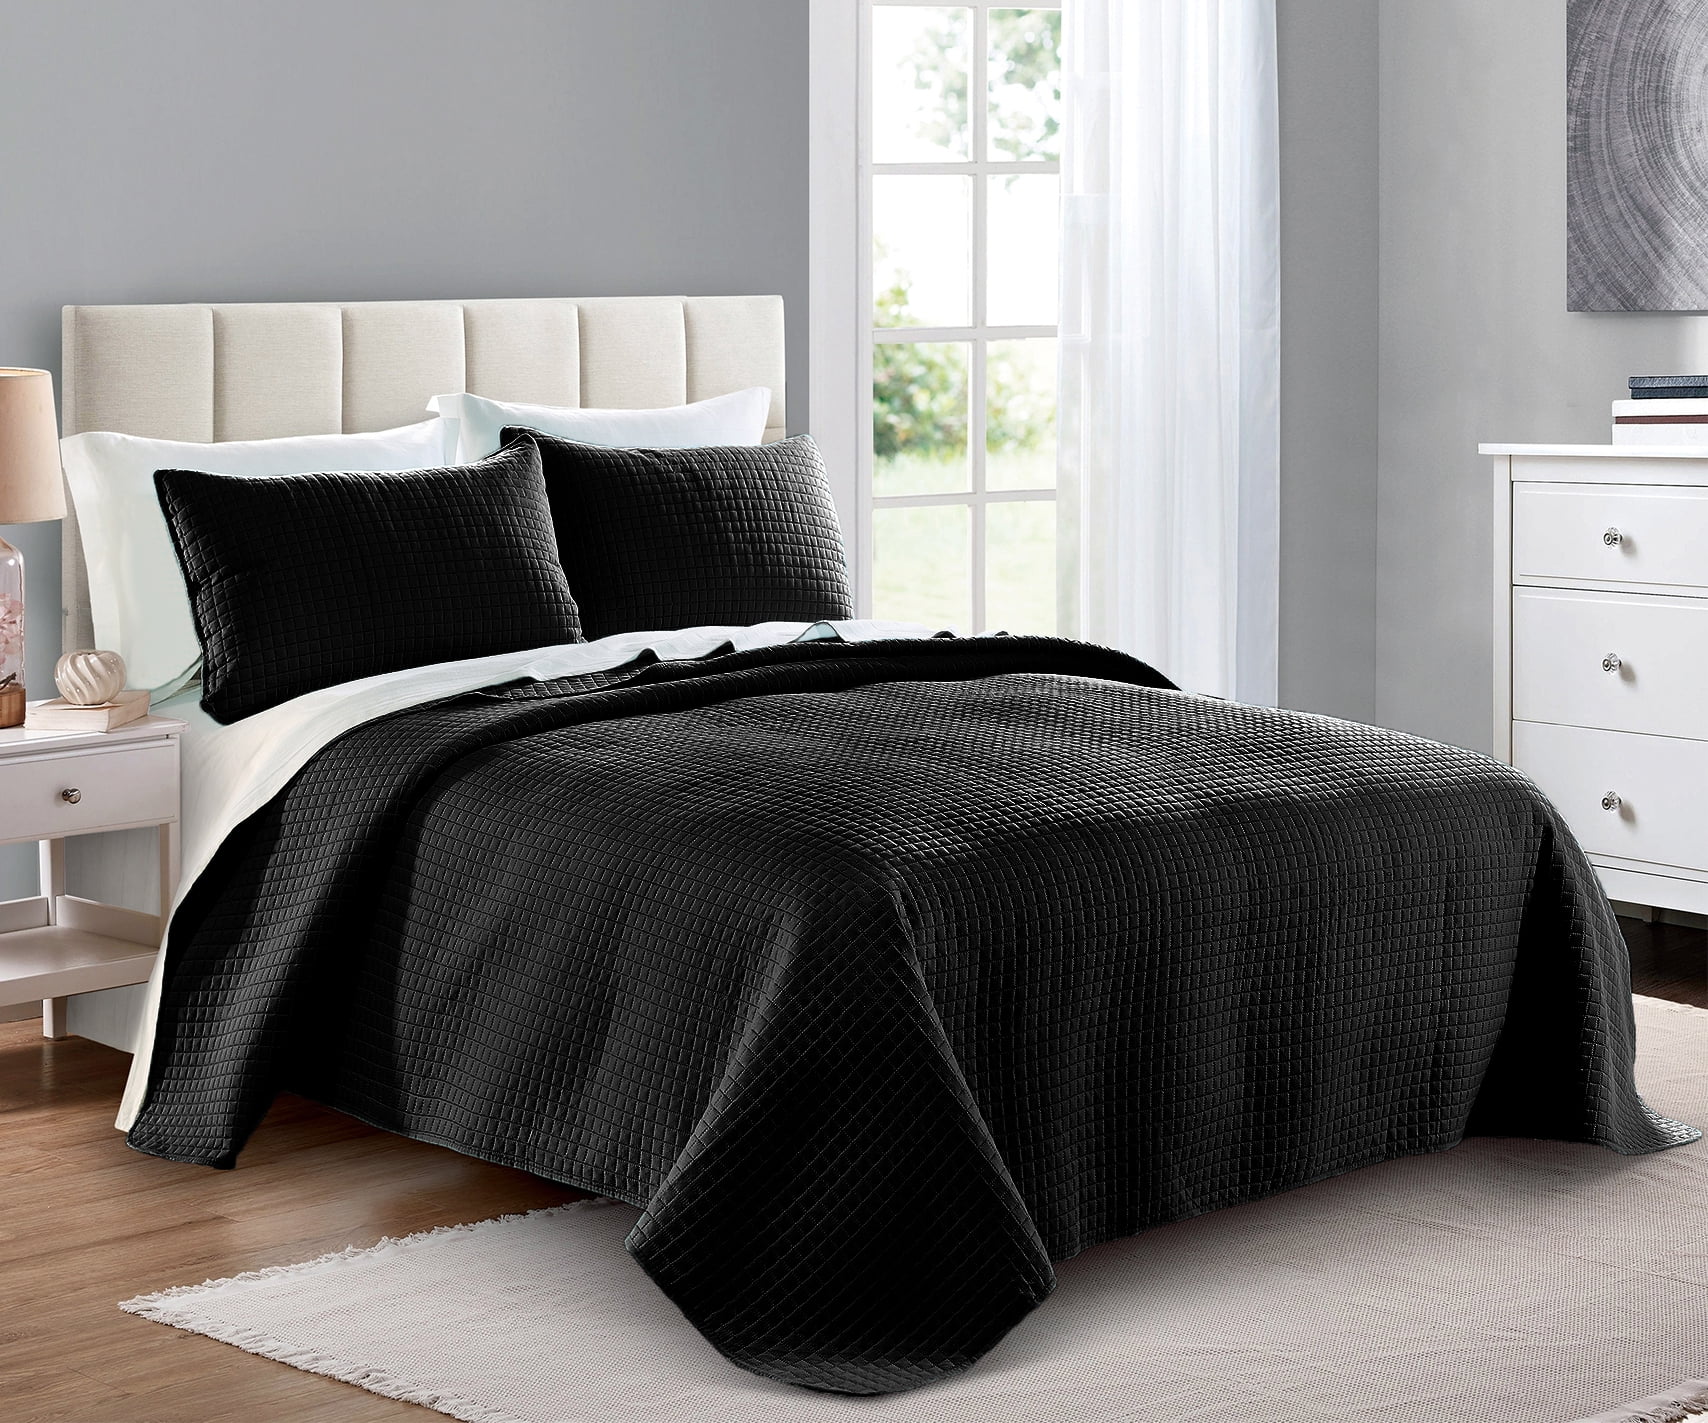 Oversized Bedspread 3 Piece Includes 1 Quilt and 2 Shams Quilt Set King/Cal King/California King Size Dark Grey Geometric Pattern Soft Microfiber Lightweight Coverlet for All Season